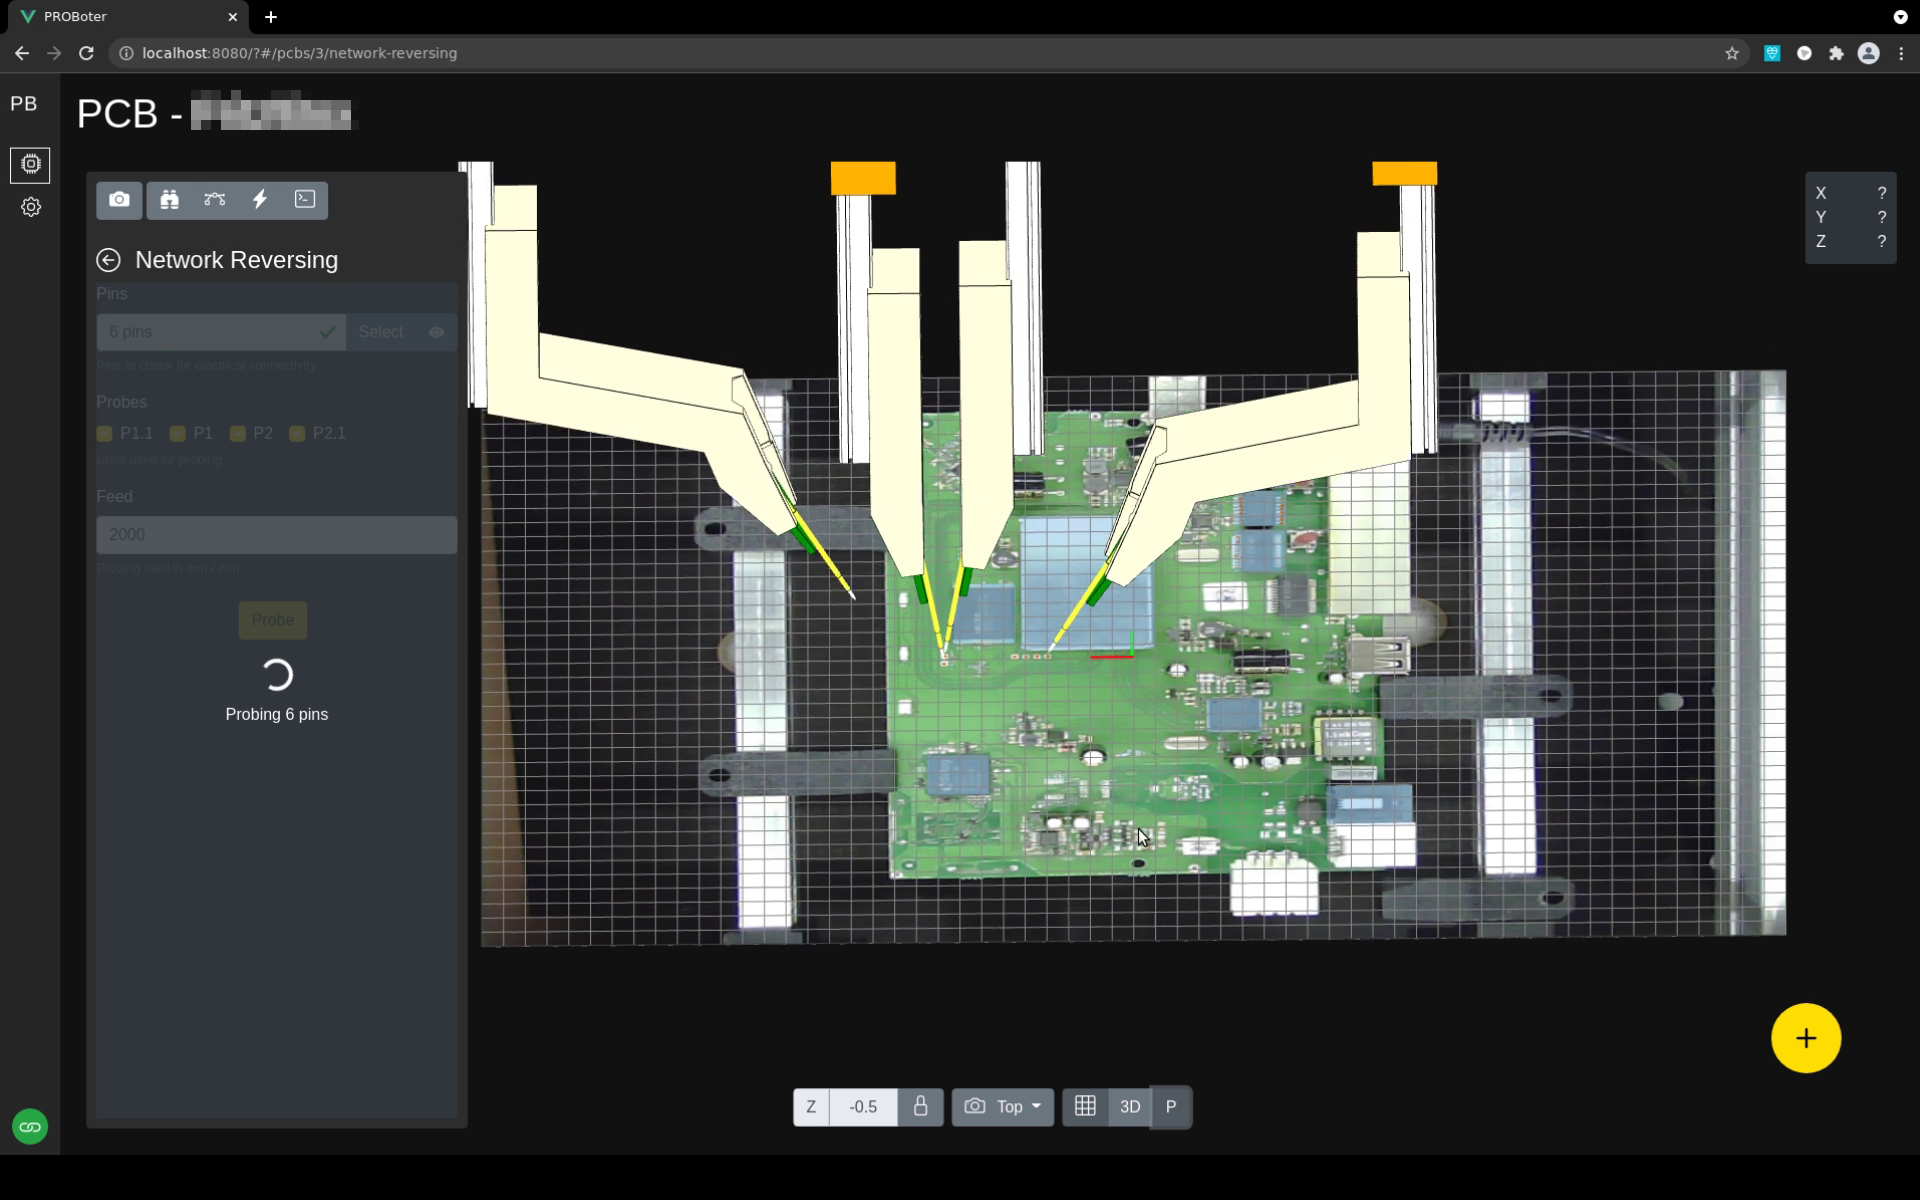 PCB editor showing a live 3D rendering of the PROBoter hardware during automated probing.